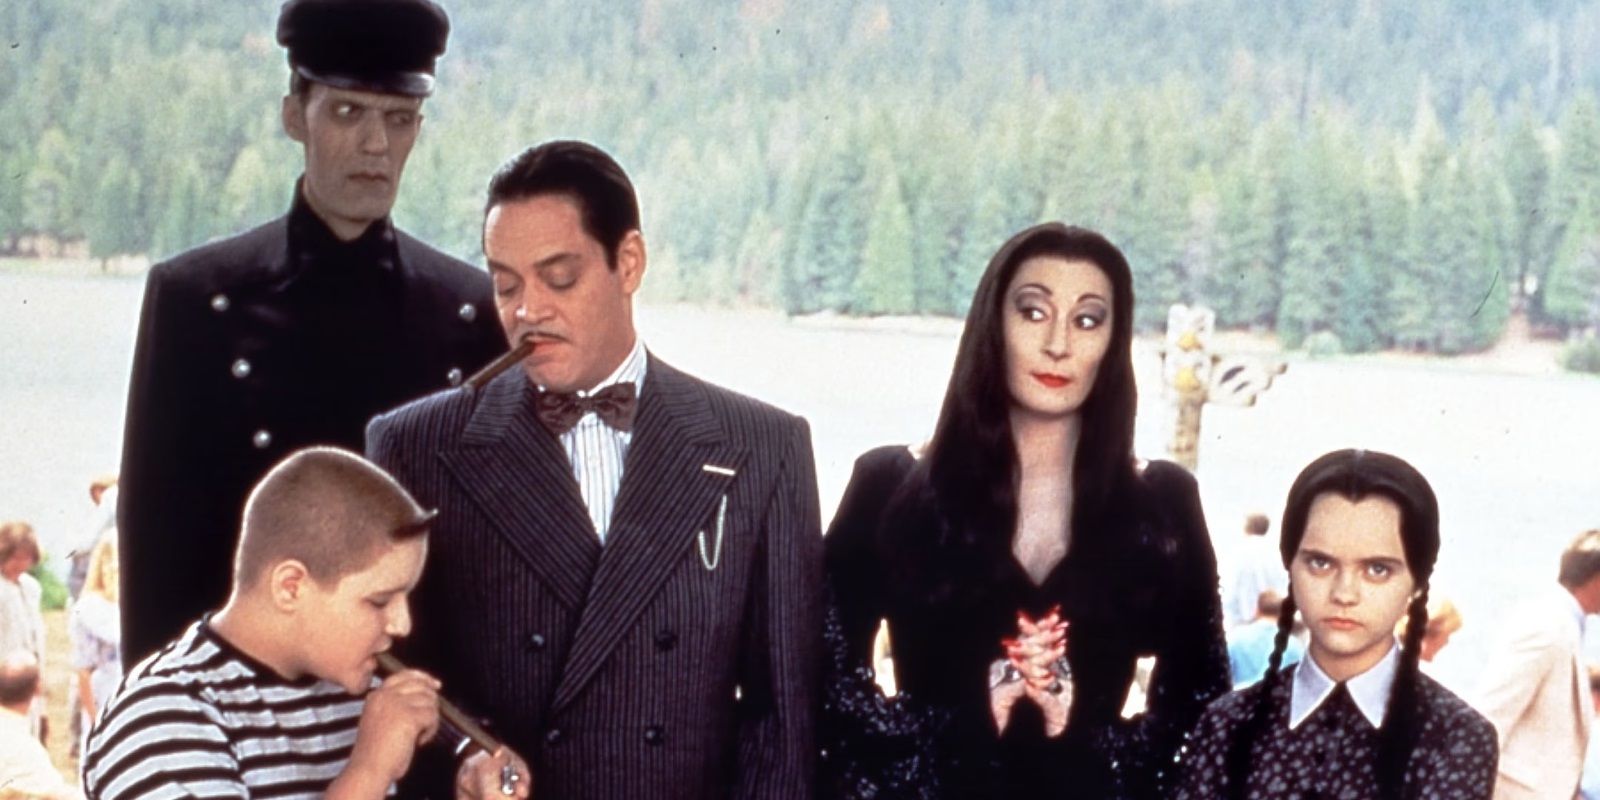 The family gathered together in Addams Family Values